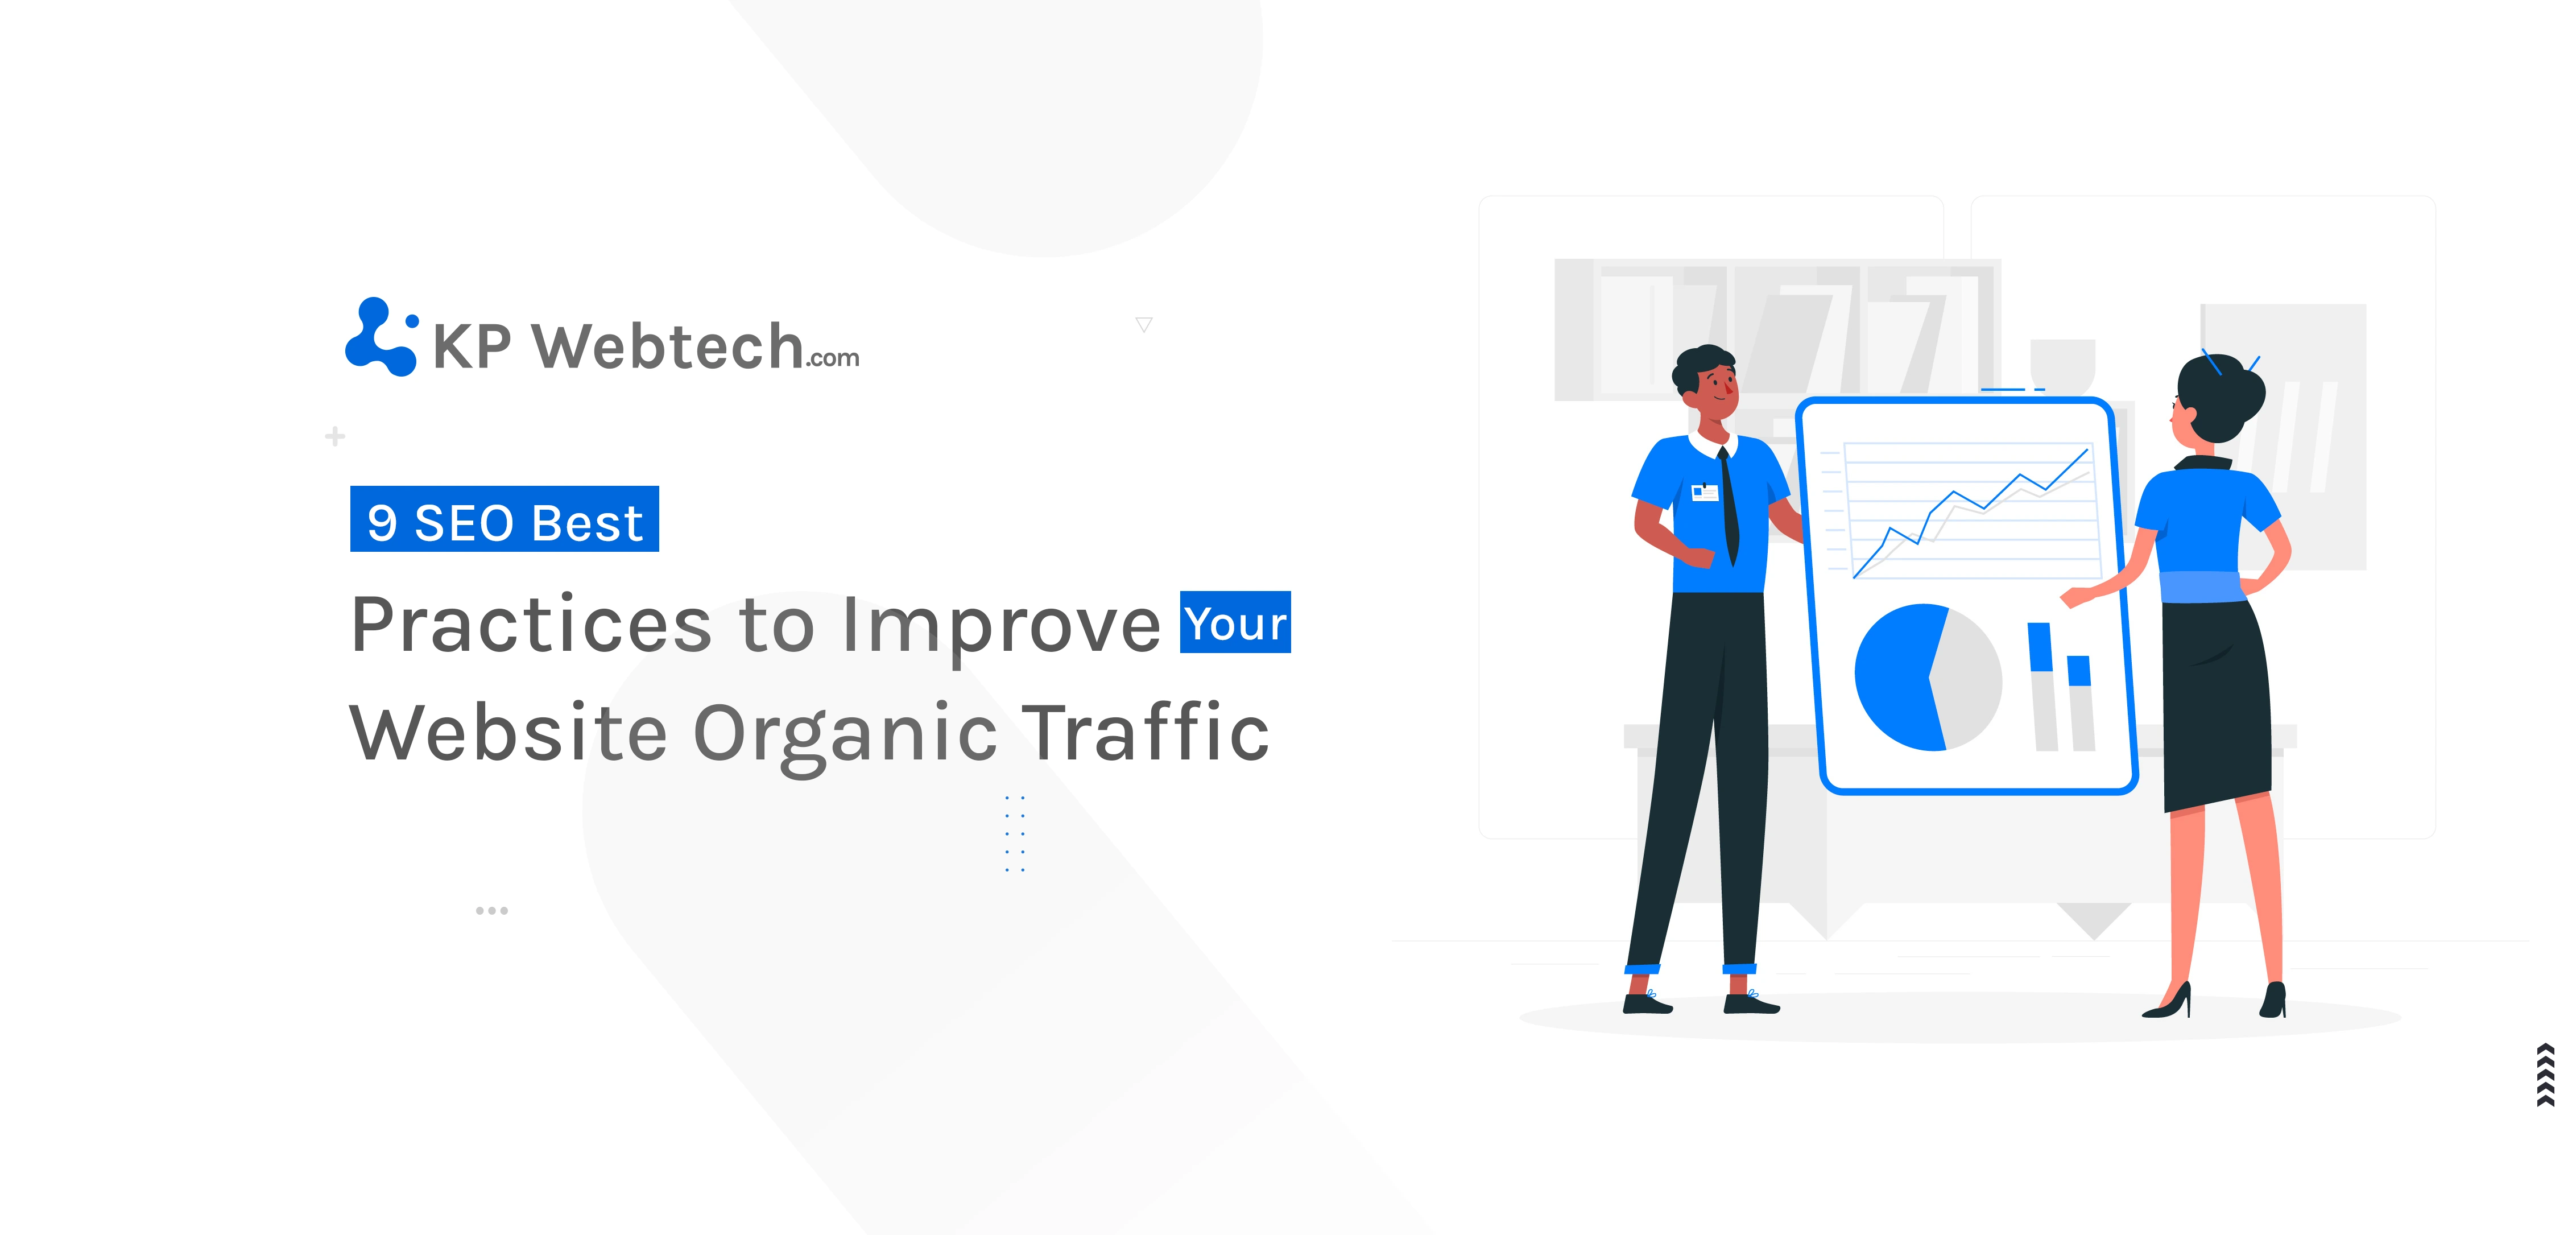 9 SEO Best Practices to Improve Your Organic Traffic